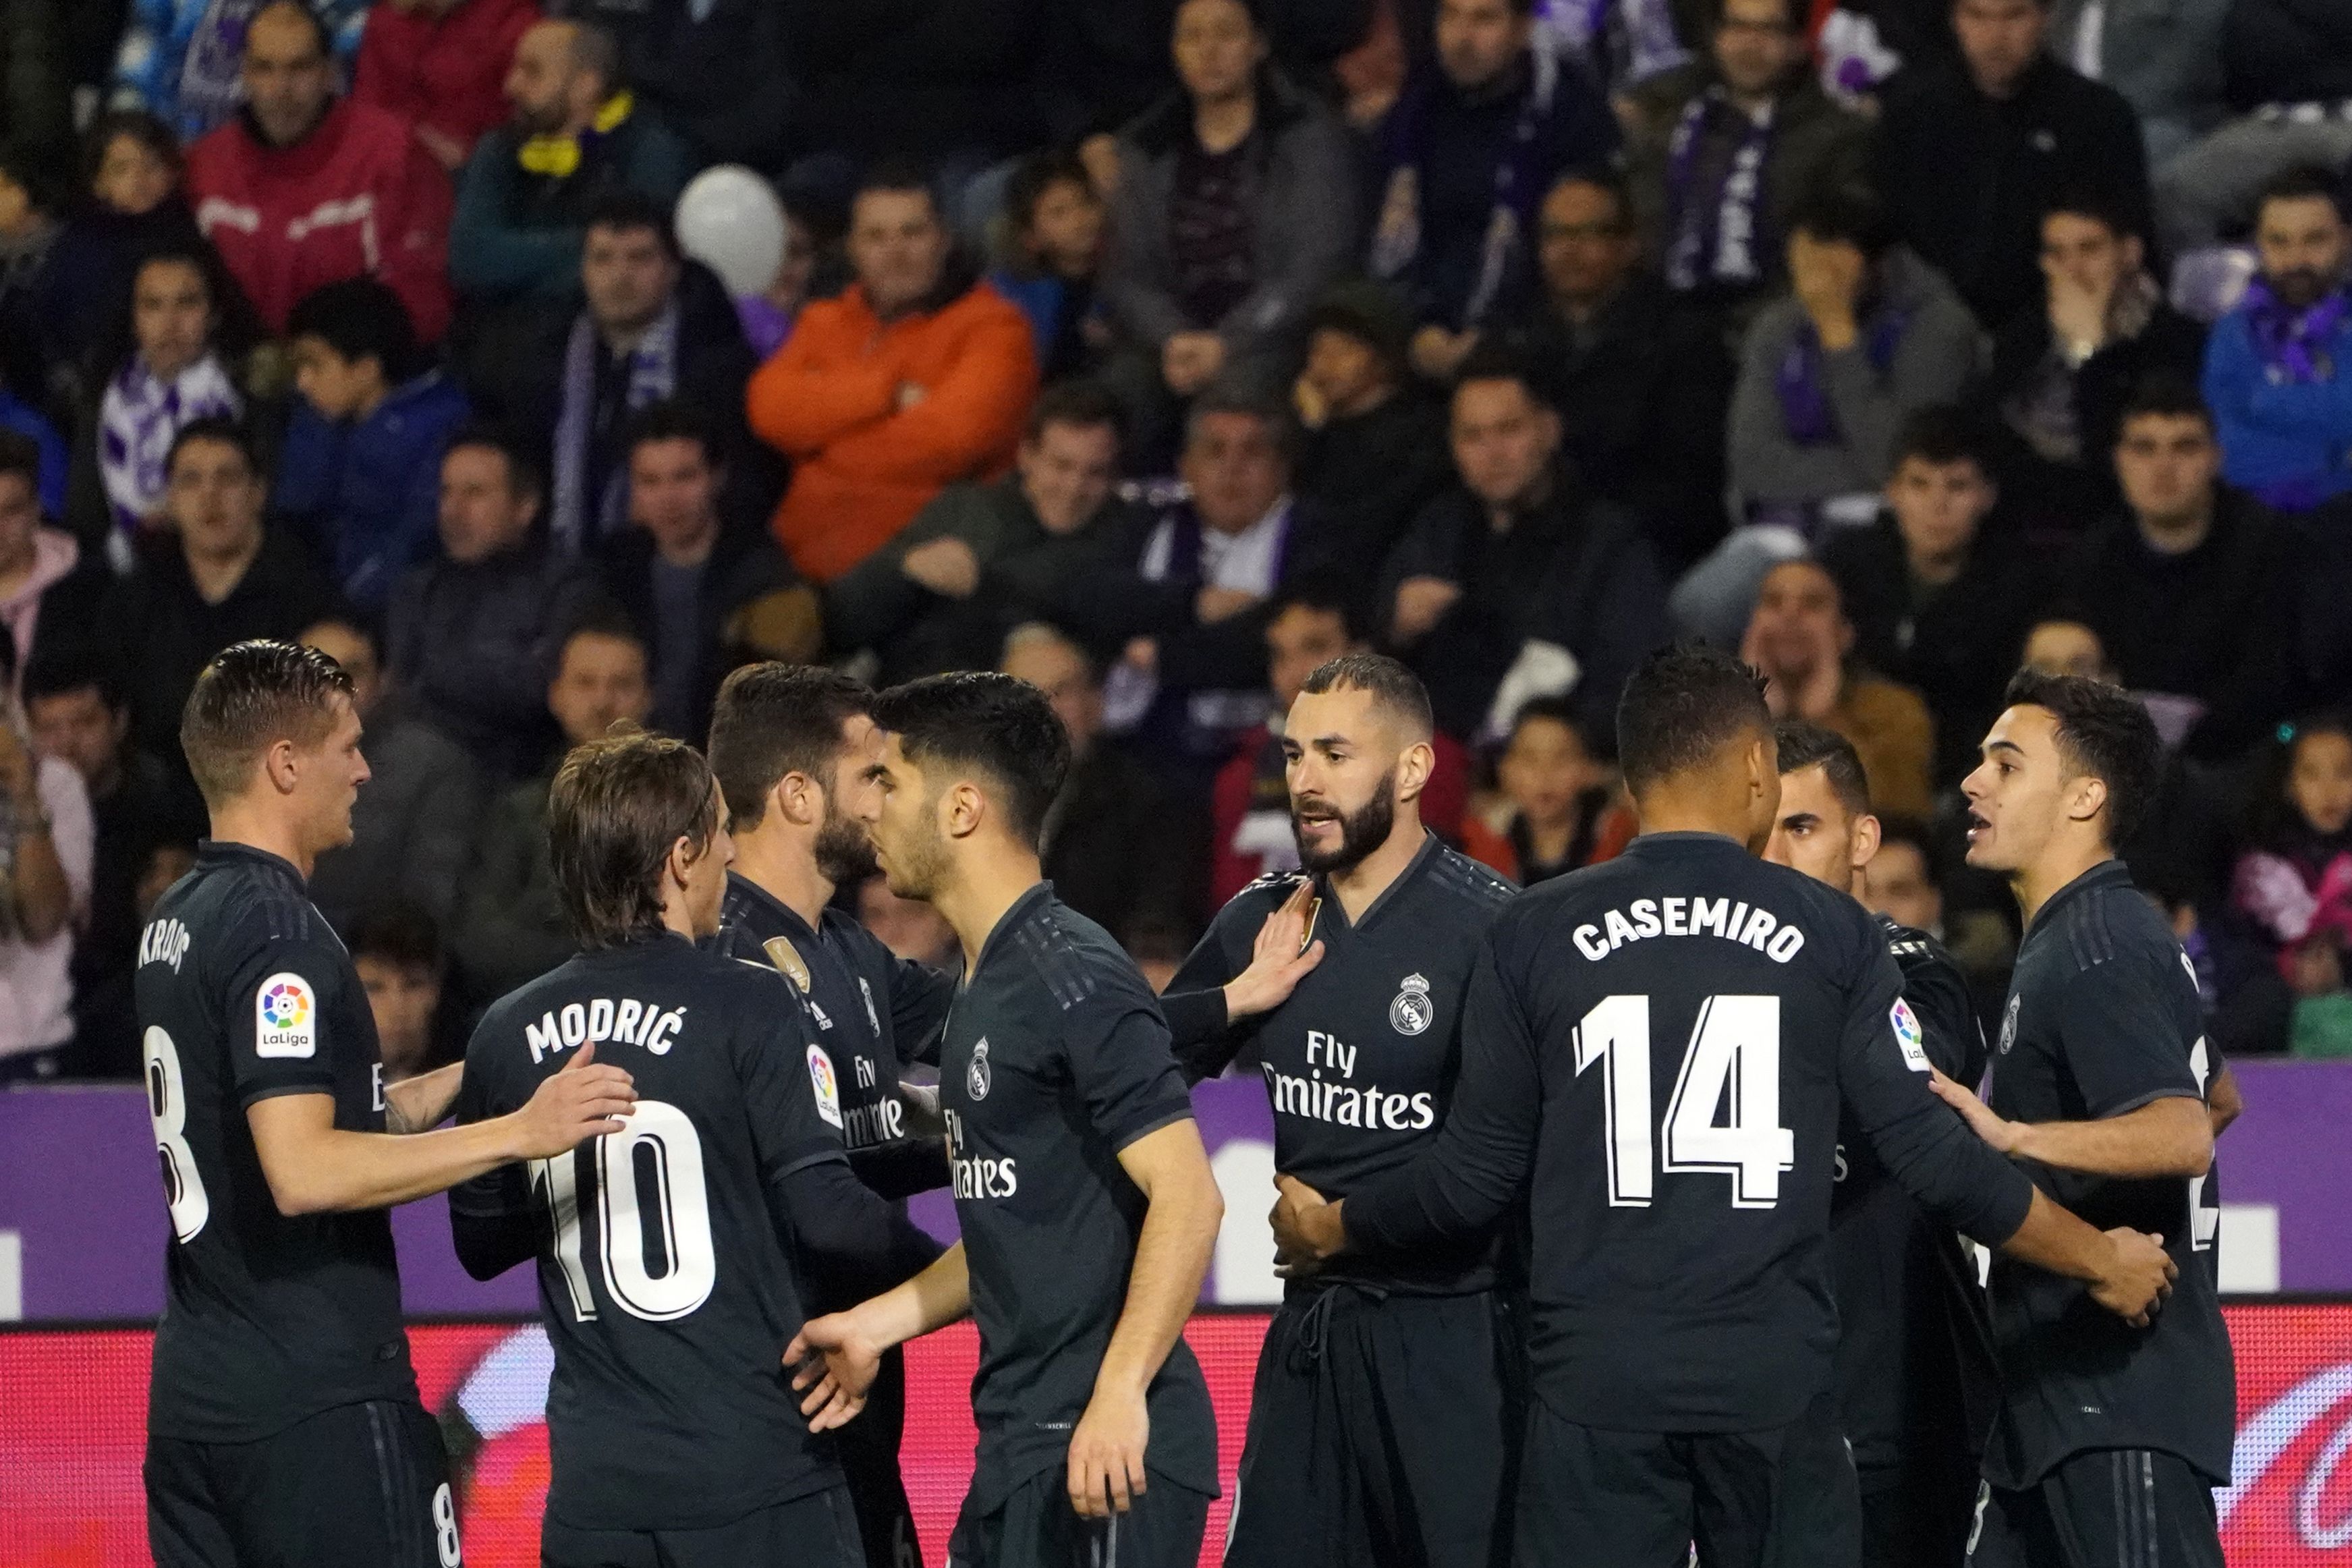 Real Madrid's French forward Karim Benzema (C) celebrates a goal with teammates during the Spanish league football match between Real Valladolid FC and Real Madrid CF at the Jose Zorrilla stadium in Valladolid on March 10, 2019. (Photo by CESAR MANSO / AFP)        (Photo credit should read CESAR MANSO/AFP/Getty Images)